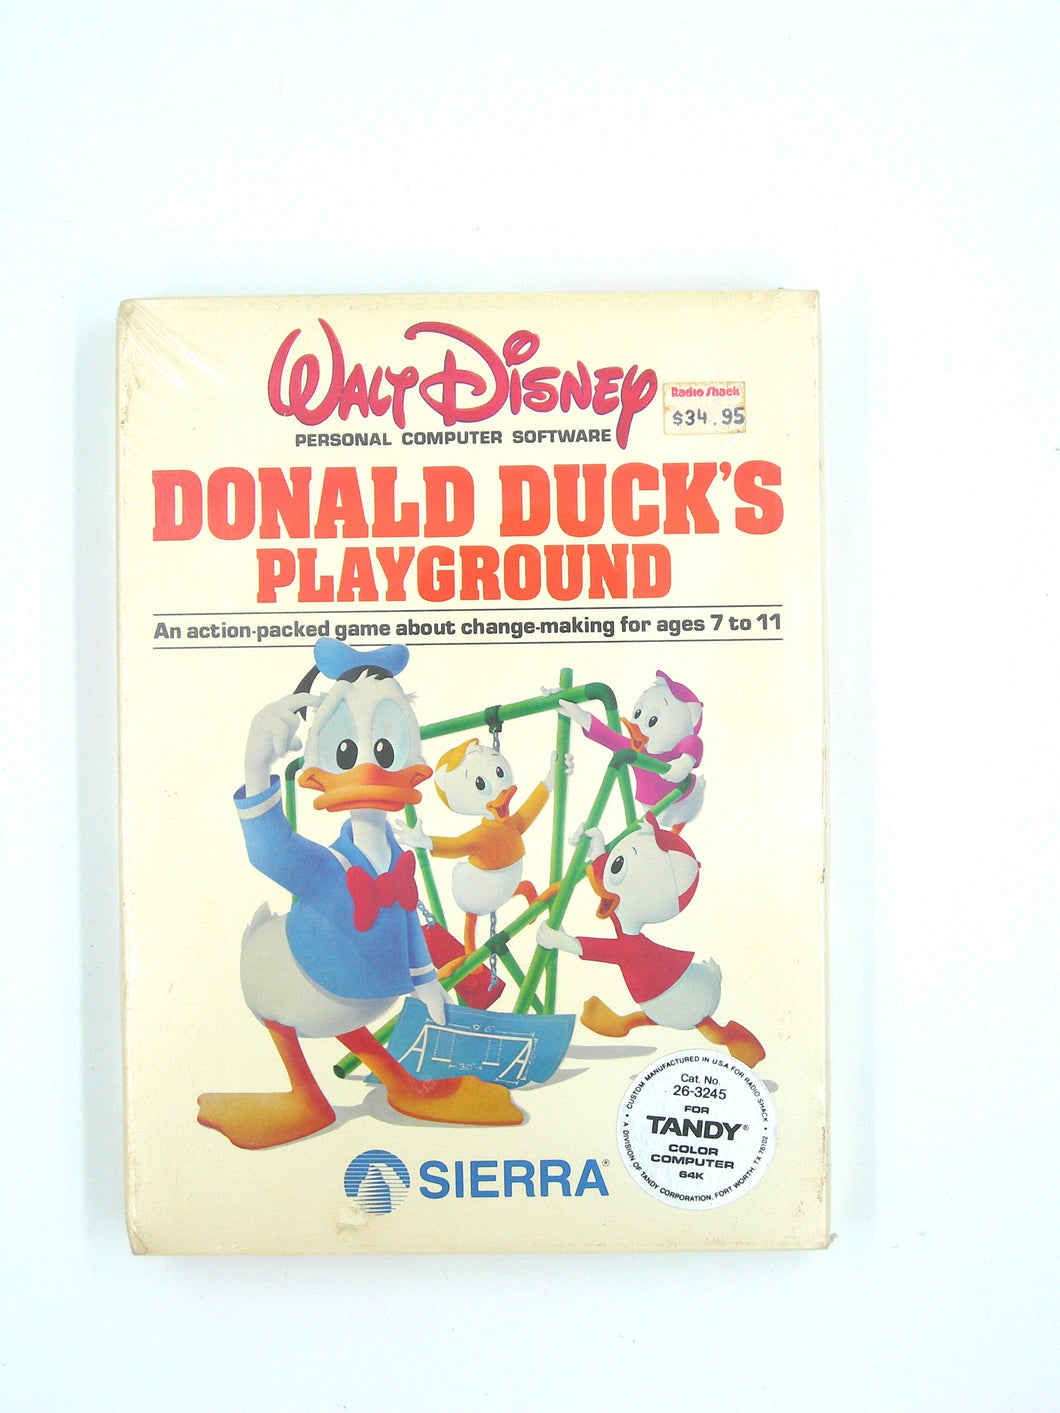 Tandy Color Computer 2,3 disk - Donald Ducks Playground 26-3245 (sealed)